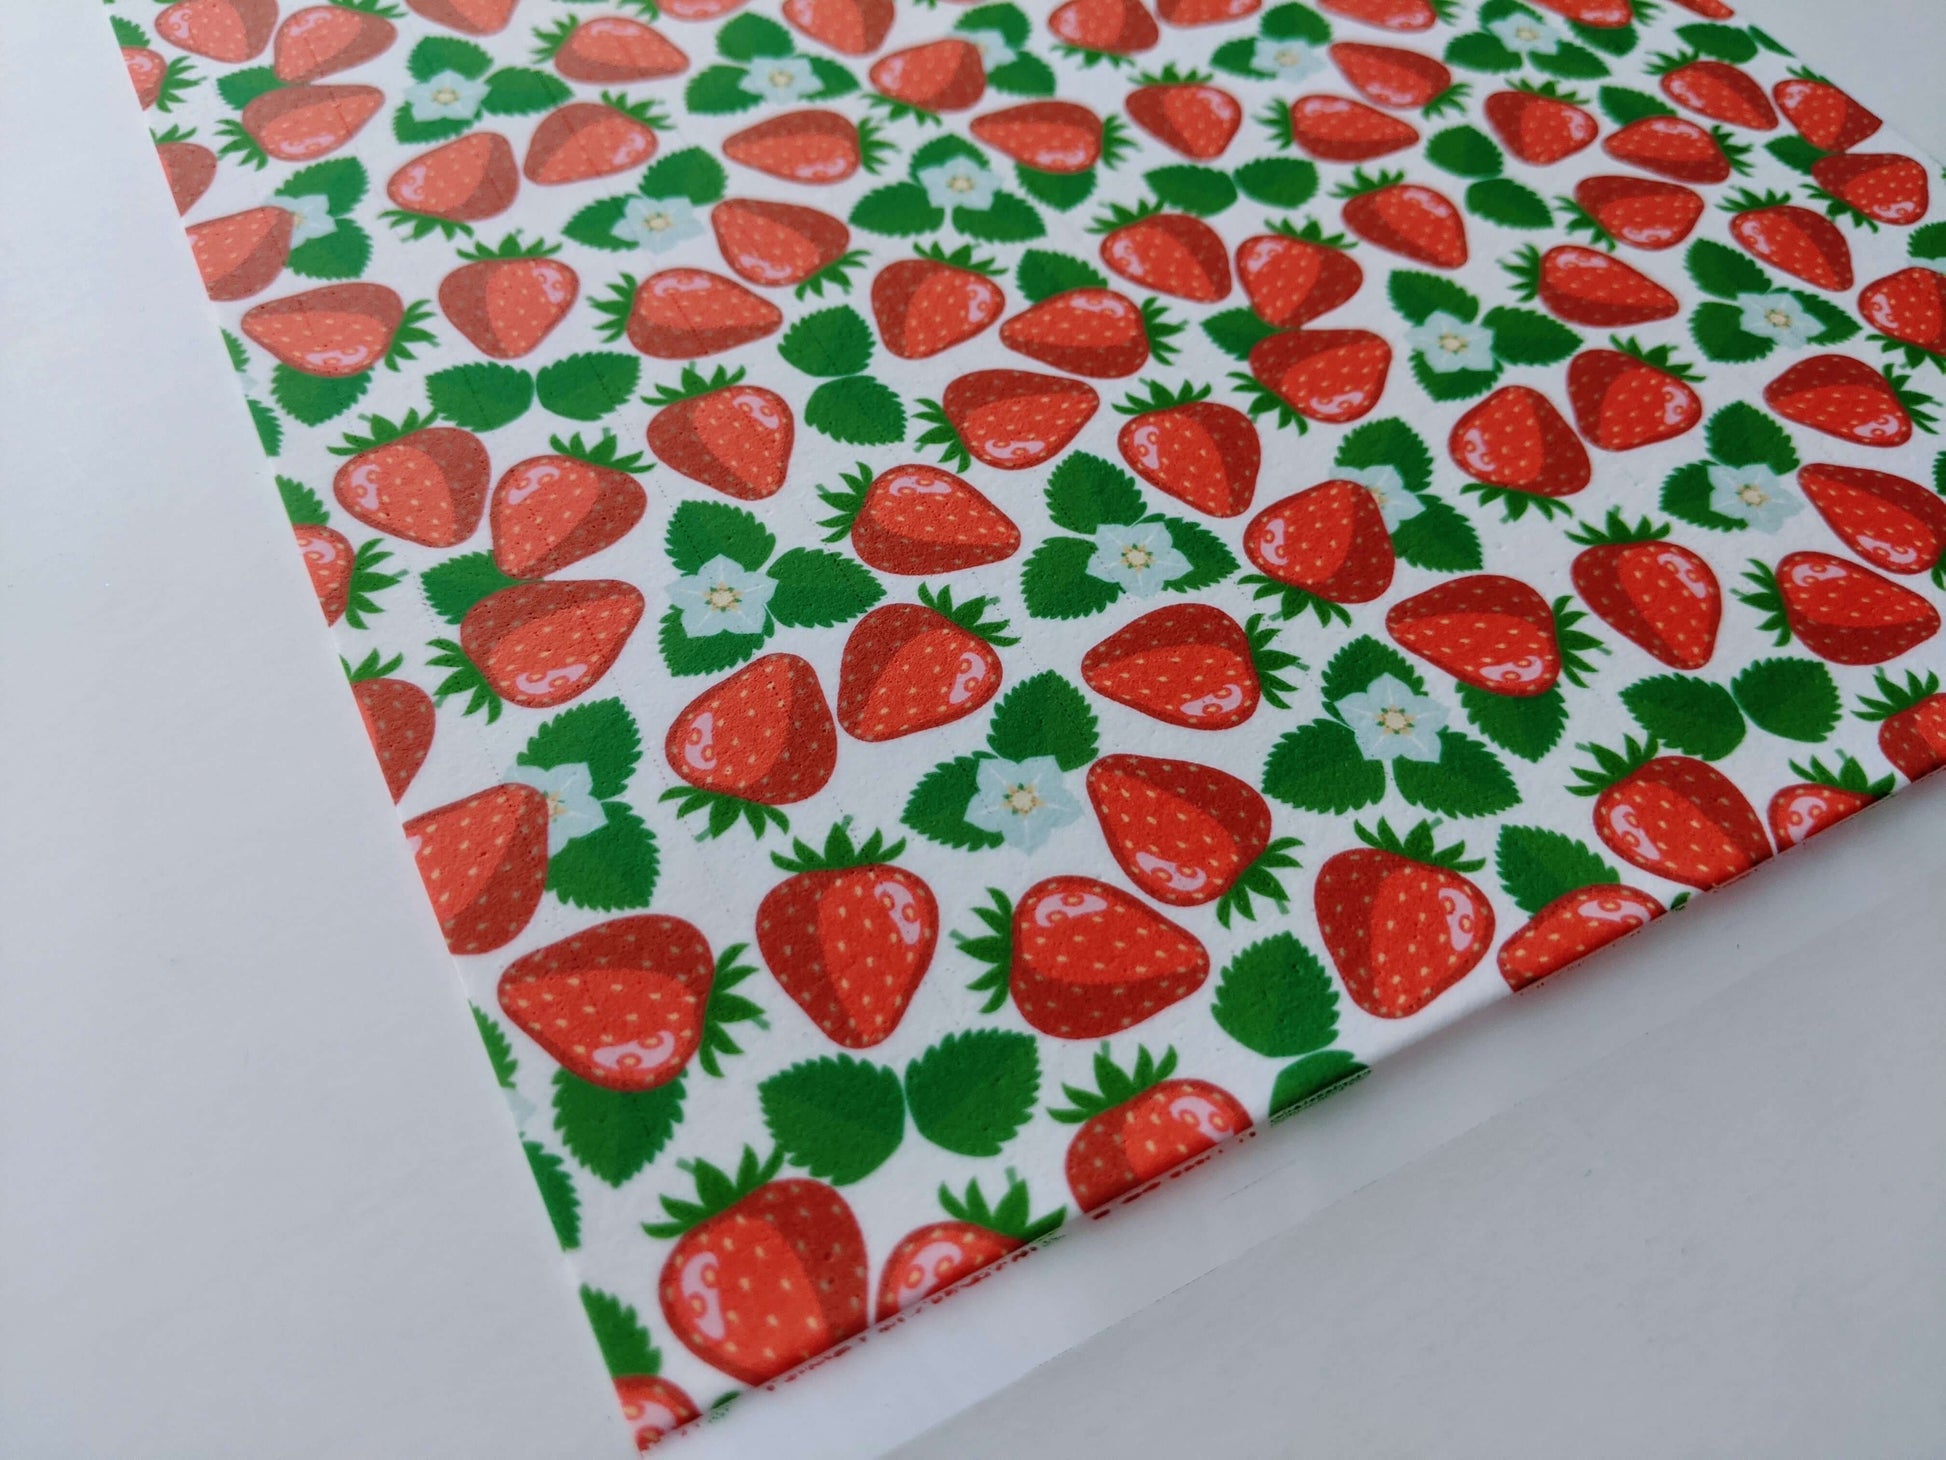 Urban Food Kit, Fabric, Red Strawberry, One Size